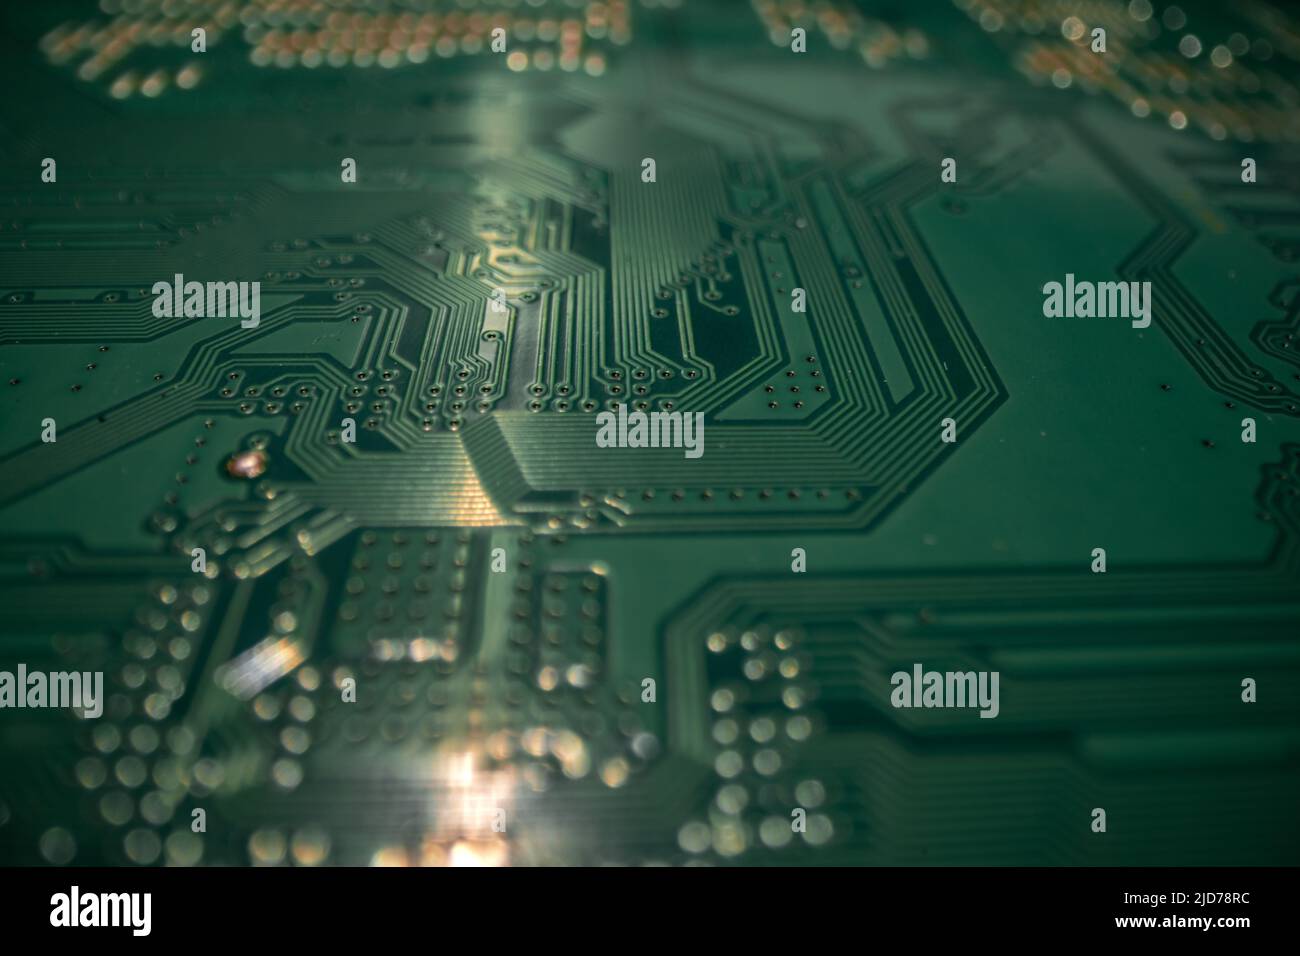 Technology hardware background. High tech electronic circuit board background. Electronic circuit board, technology chips to the motherboard Stock Photo